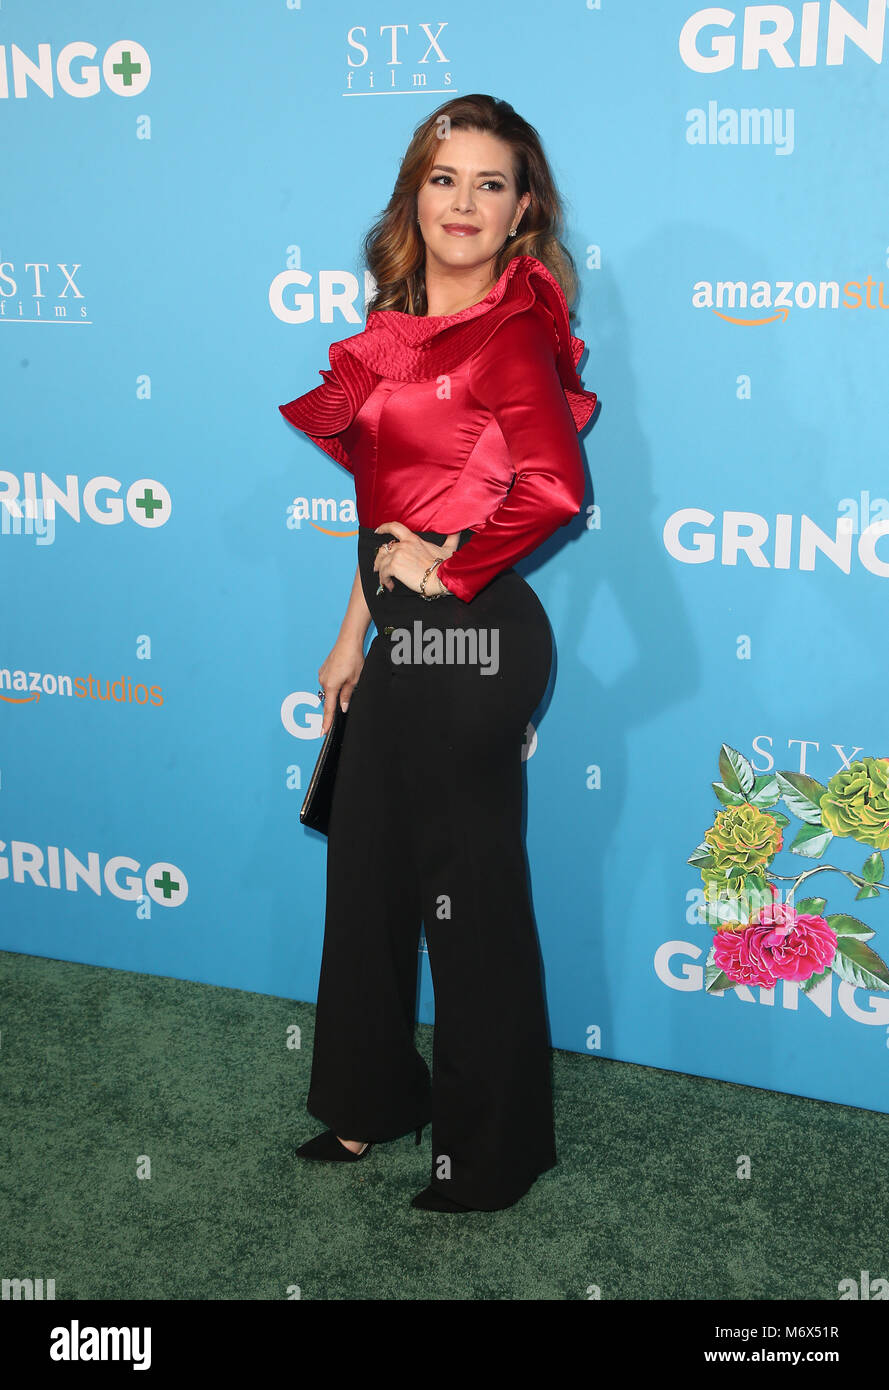 LOS ANGELES, CA - MARCH 6: Alicia Machado, at the Woled Premiere of Gringo at L.A. Live Regal Cinemas in Los Angeles, California on March 6, 2018. Credit: Faye Sadou/MediaPunch Stock Photo